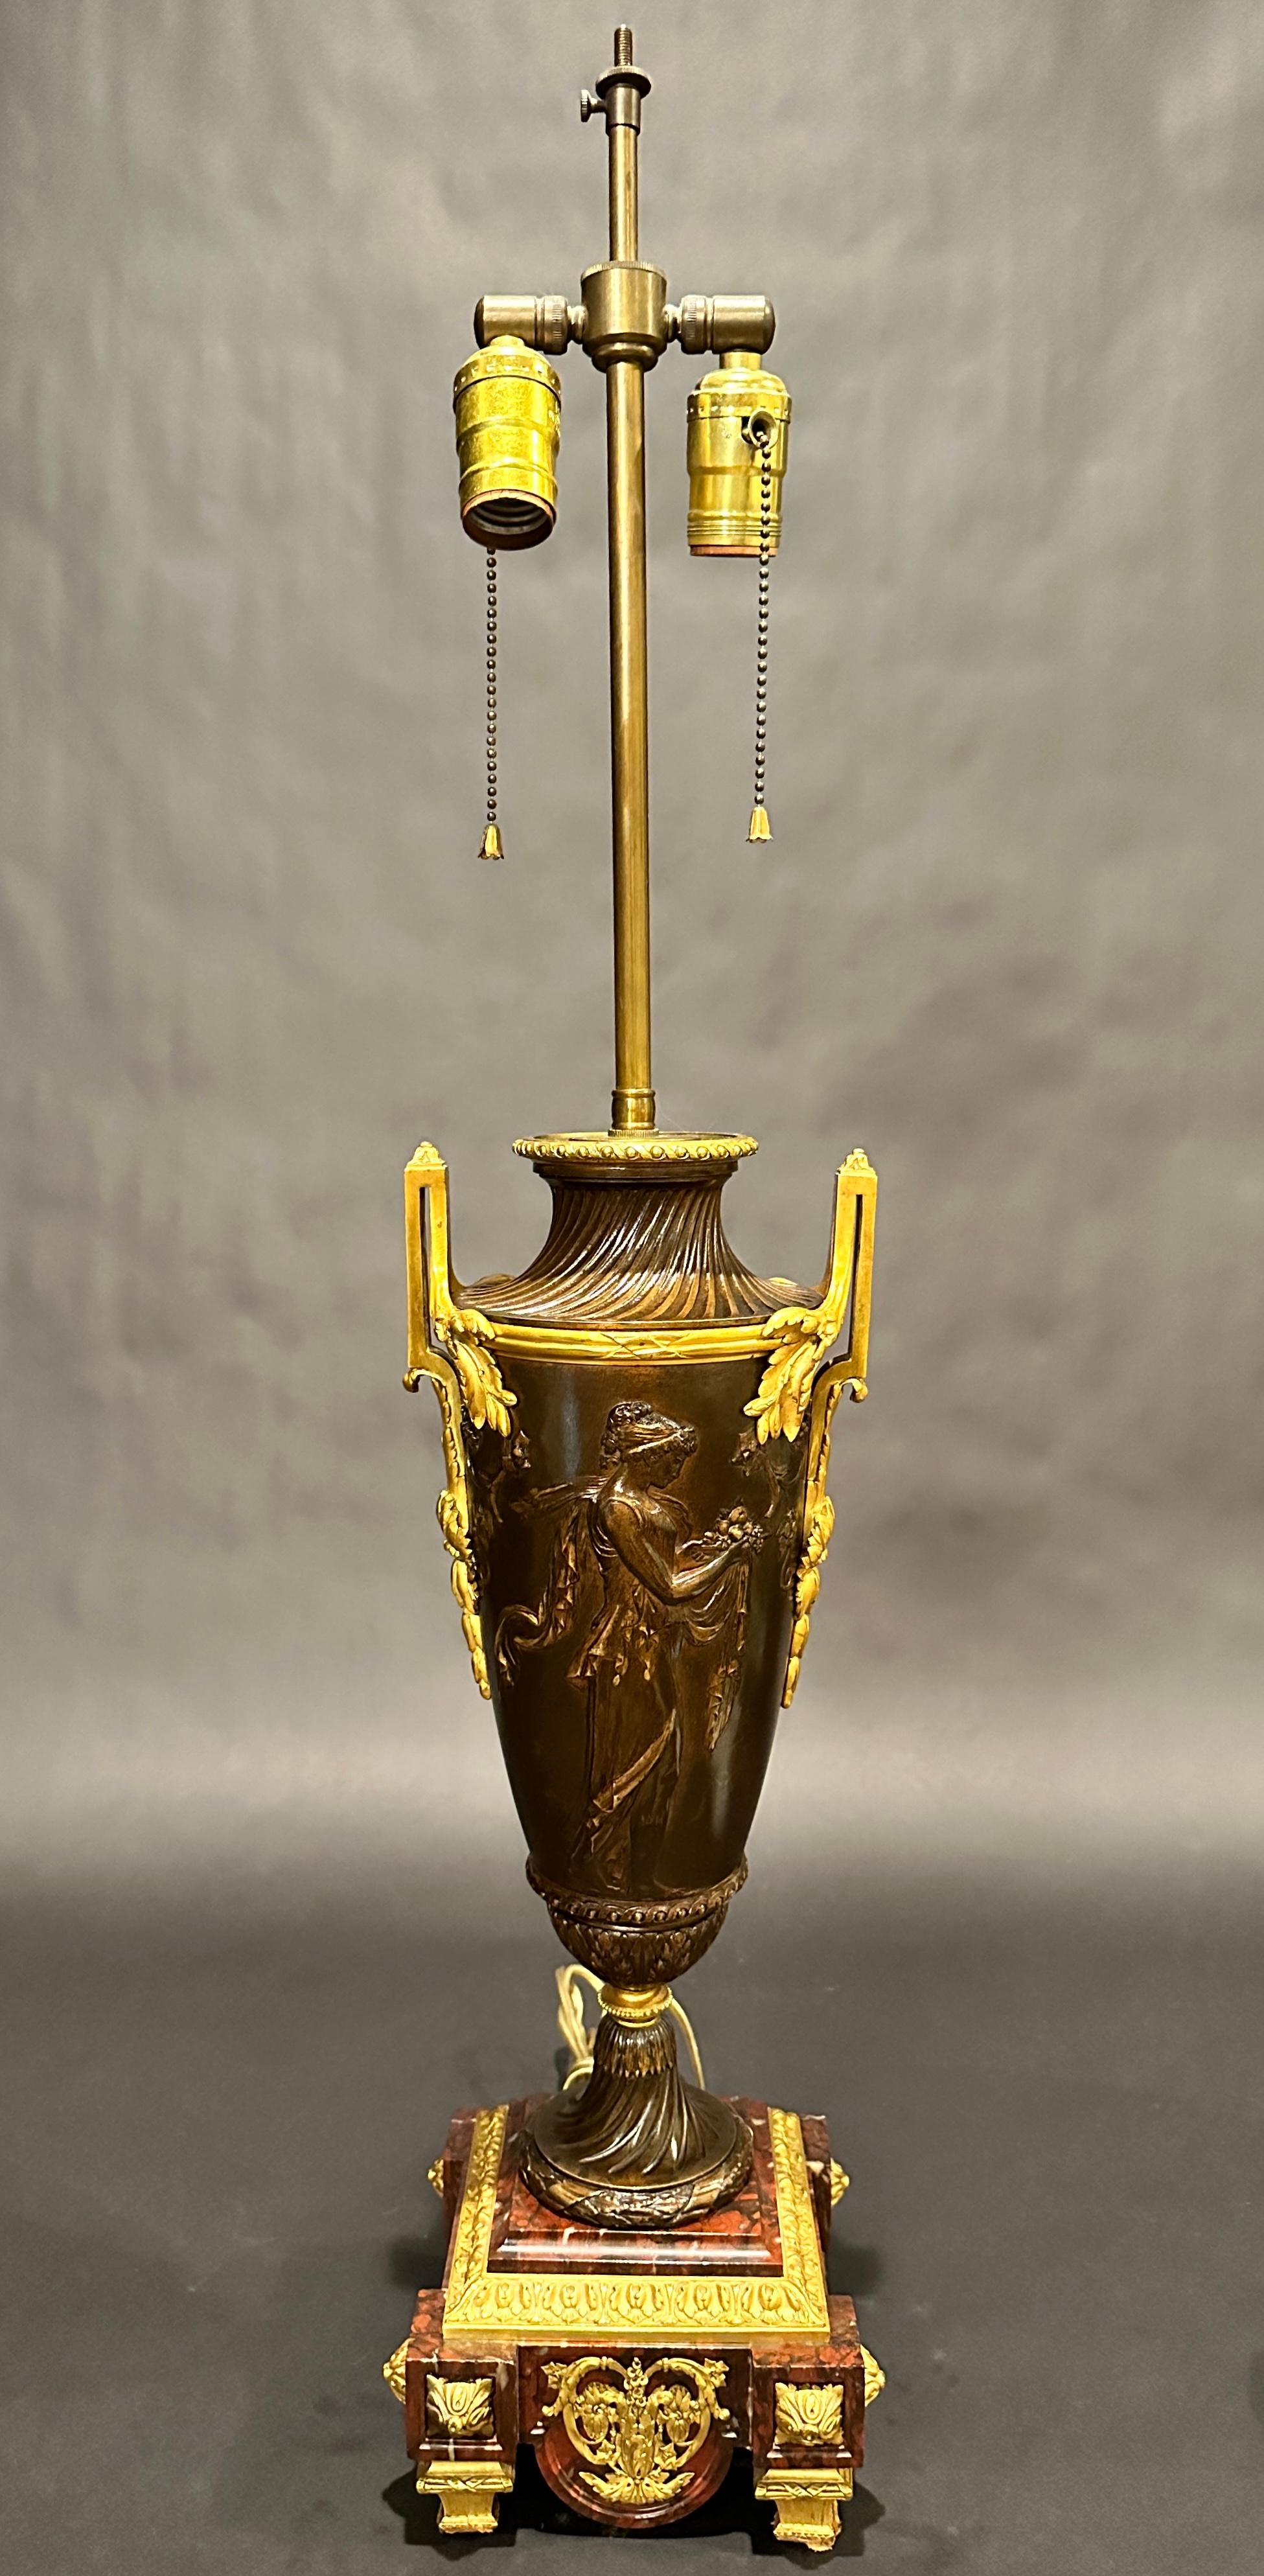 Antique 19th century patinated urn with gilt handles mounted on a rouge marble stepped base adorned with finely cast gilt mounts. Urn designed with classical women with fruit and wine.
20